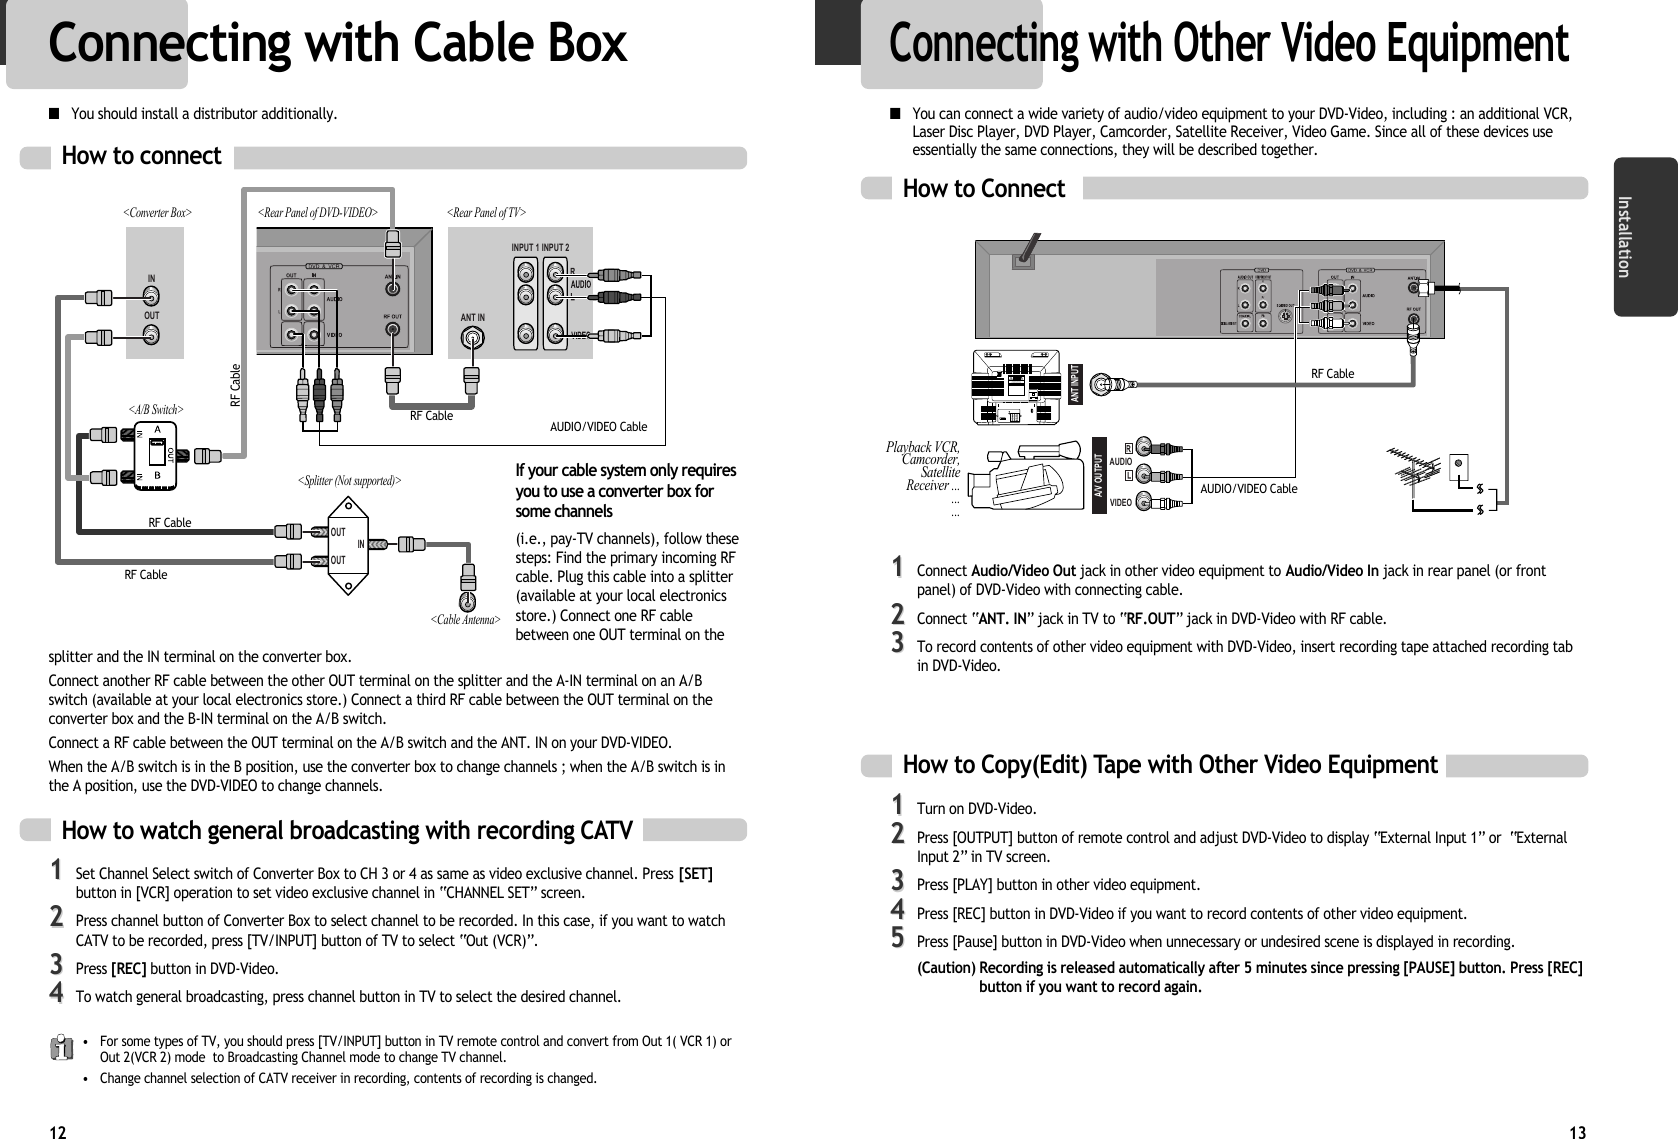 13Installation12Connecting with Cable BoxHow to connect INPUT 1 INOUT ANT ININPUT 2OUTOUTINIf your cable system only requiresyou to use a converter box forsome channels(i.e., pay-TV channels), follow thesesteps: Find the primary incoming RFcable. Plug this cable into a splitter(available at your local electronicsstore.) Connect one RF cablebetween one OUT terminal on the■You should install a distributor additionally. How to watch general broadcasting with recording CATV11Set Channel Select switch of Converter Box to CH 3 or 4 as same as video exclusive channel. Press [SET]button in [VCR] operation to set video exclusive channel in ÒCHANNEL SETÓ screen. 22Press channel button of Converter Box to select channel to be recorded. In this case, if you want to watchCATV to be recorded, press [TV/INPUT] button of TV to select ÒOut (VCR)Ó. 33Press [REC] button in DVD-Video. 44To watch general broadcasting, press channel button in TV to select the desired channel.splitter and the IN terminal on the converter box. Connect another RF cable between the other OUT terminal on the splitter and the A-IN terminal on an A/Bswitch (available at your local electronics store.) Connect a third RF cable between the OUT terminal on theconverter box and the B-IN terminal on the A/B switch. Connect a RF cable between the OUT terminal on the A/B switch and the ANT. IN on your DVD-VIDEO.When the A/B switch is in the B position, use the converter box to change channels ; when the A/B switch is inthe A position, use the DVD-VIDEO to change channels.¥ For some types of TV, you should press [TV/INPUT] button in TV remote control and convert from Out 1( VCR 1) orOut 2(VCR 2) mode  to Broadcasting Channel mode to change TV channel. ¥ Change channel selection of CATV receiver in recording, contents of recording is changed. &lt;Rear Panel of DVD-VIDEO&gt;&lt;Converter Box&gt; &lt;Rear Panel of TV&gt;RF Cable AUDIO/VIDEO CableRF CableRF Cable&lt;A/B Switch&gt;&lt;Splitter (Not supported)&gt;&lt;Cable Antenna&gt;RF CableConnecting with Other Video EquipmentHow to Connect AUDIOVIDEOANT INPUTA/V OUTPUTCAUTIONCAUTION: TO REDUCE THE RISK OF ELECTRIC SHOCK.DO NOT REMOVE COVER (OR BACK).NO USER SERVICEABLE PARTS INSIDE.REFER SERVICING TO QUALIFIED SERVICE PRESONNEL.RISK OF ELECTRIC SHOCKDO NOT OPEN201816 14 12 10 8 6 4 3211917 15 13 11 9 7 5 3 1How to Copy(Edit) Tape with Other Video Equipment11Connect Audio/Video Out jack in other video equipment to Audio/Video In jack in rear panel (or frontpanel) of DVD-Video with connecting cable. 22Connect ÒANT. INÓ jack in TV to ÒRF.OUTÓ jack in DVD-Video with RF cable. 33To record contents of other video equipment with DVD-Video, insert recording tape attached recording tabin DVD-Video. 11Turn on DVD-Video. 22Press [OUTPUT] button of remote control and adjust DVD-Video to display ÒExternal Input 1Ó or  ÒExternalInput 2Ó in TV screen. 33Press [PLAY] button in other video equipment. 44Press [REC] button in DVD-Video if you want to record contents of other video equipment. 55Press [Pause] button in DVD-Video when unnecessary or undesired scene is displayed in recording. (Caution) Recording is released automatically after 5 minutes since pressing [PAUSE] button. Press [REC]button if you want to record again. Playback VCR,Camcorder,SatelliteReceiver .........RF CableAUDIO/VIDEO Cable■You can connect a wide variety of audio/video equipment to your DVD-Video, including : an additional VCR,Laser Disc Player, DVD Player, Camcorder, Satellite Receiver, Video Game. Since all of these devices useessentially the same connections, they will be described together.